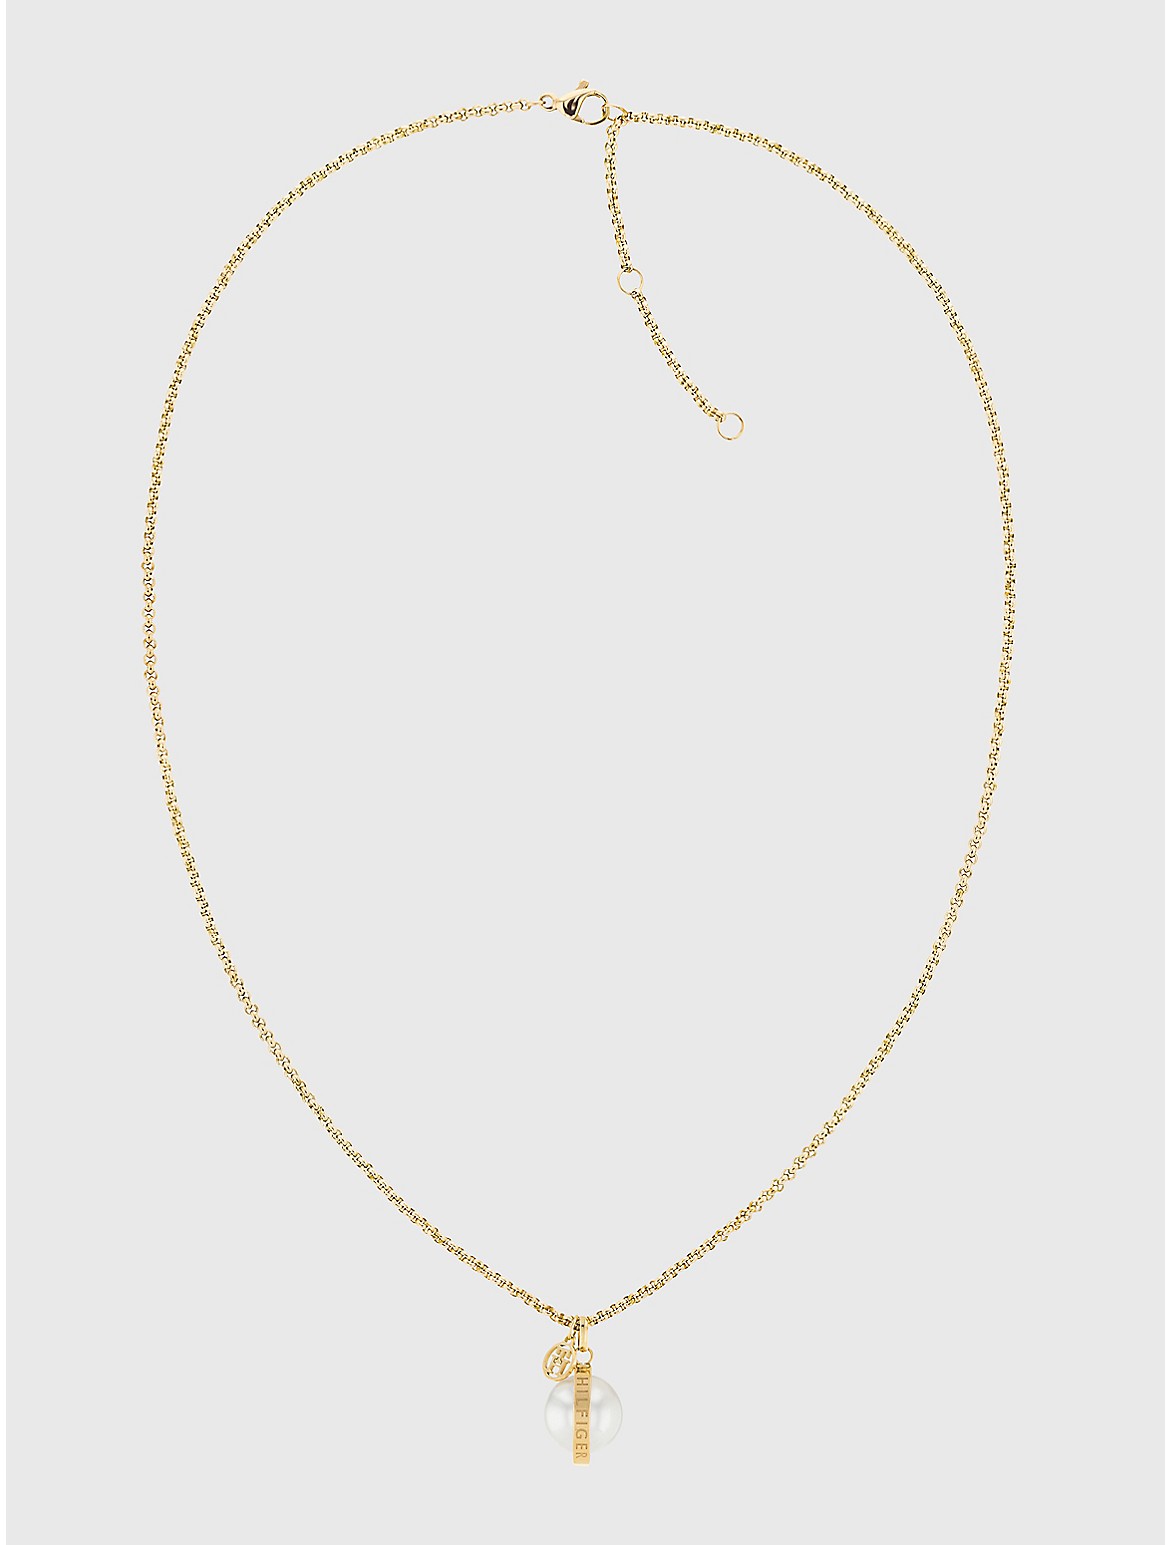 Tommy Hilfiger Women's Gold-Tone Orb Necklace - Metallic